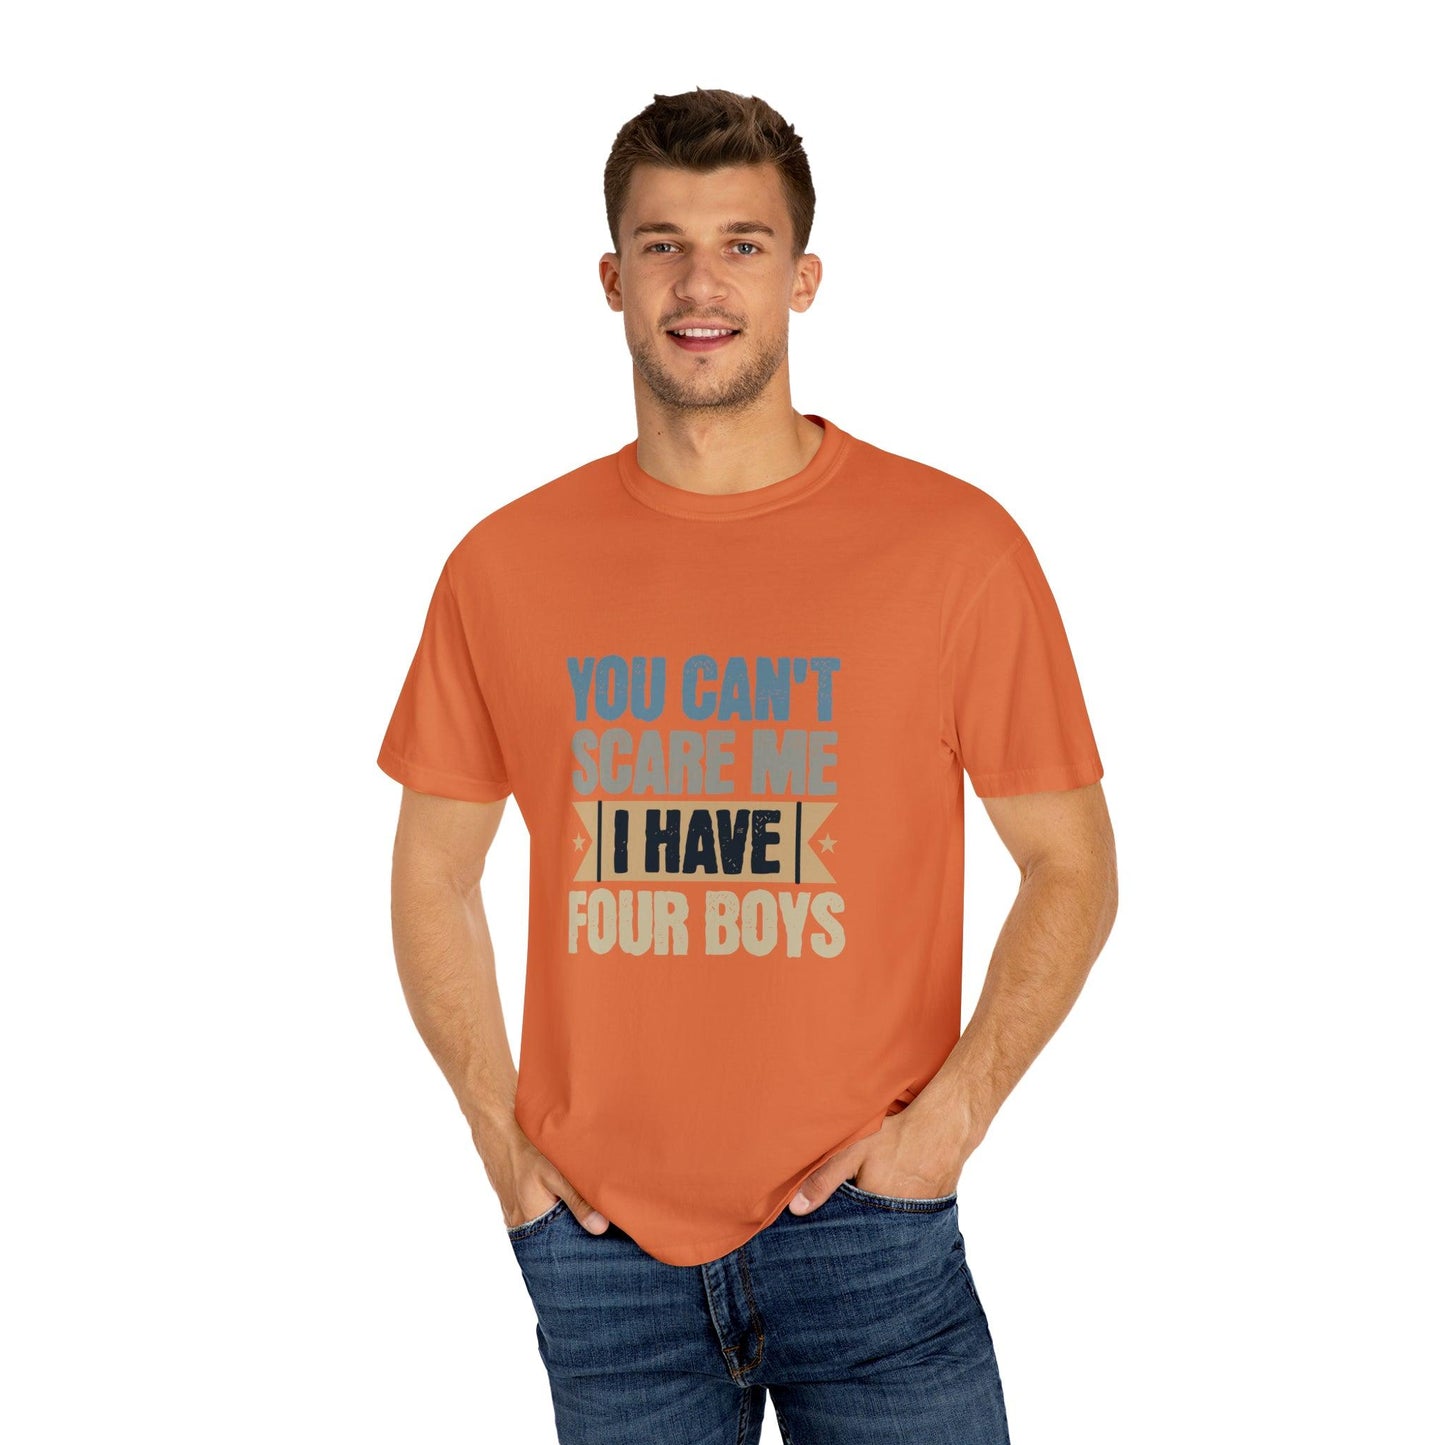 You Can't Scare Me, I Have 4 Boys: Proud Mama T-Shirt - Pandaize